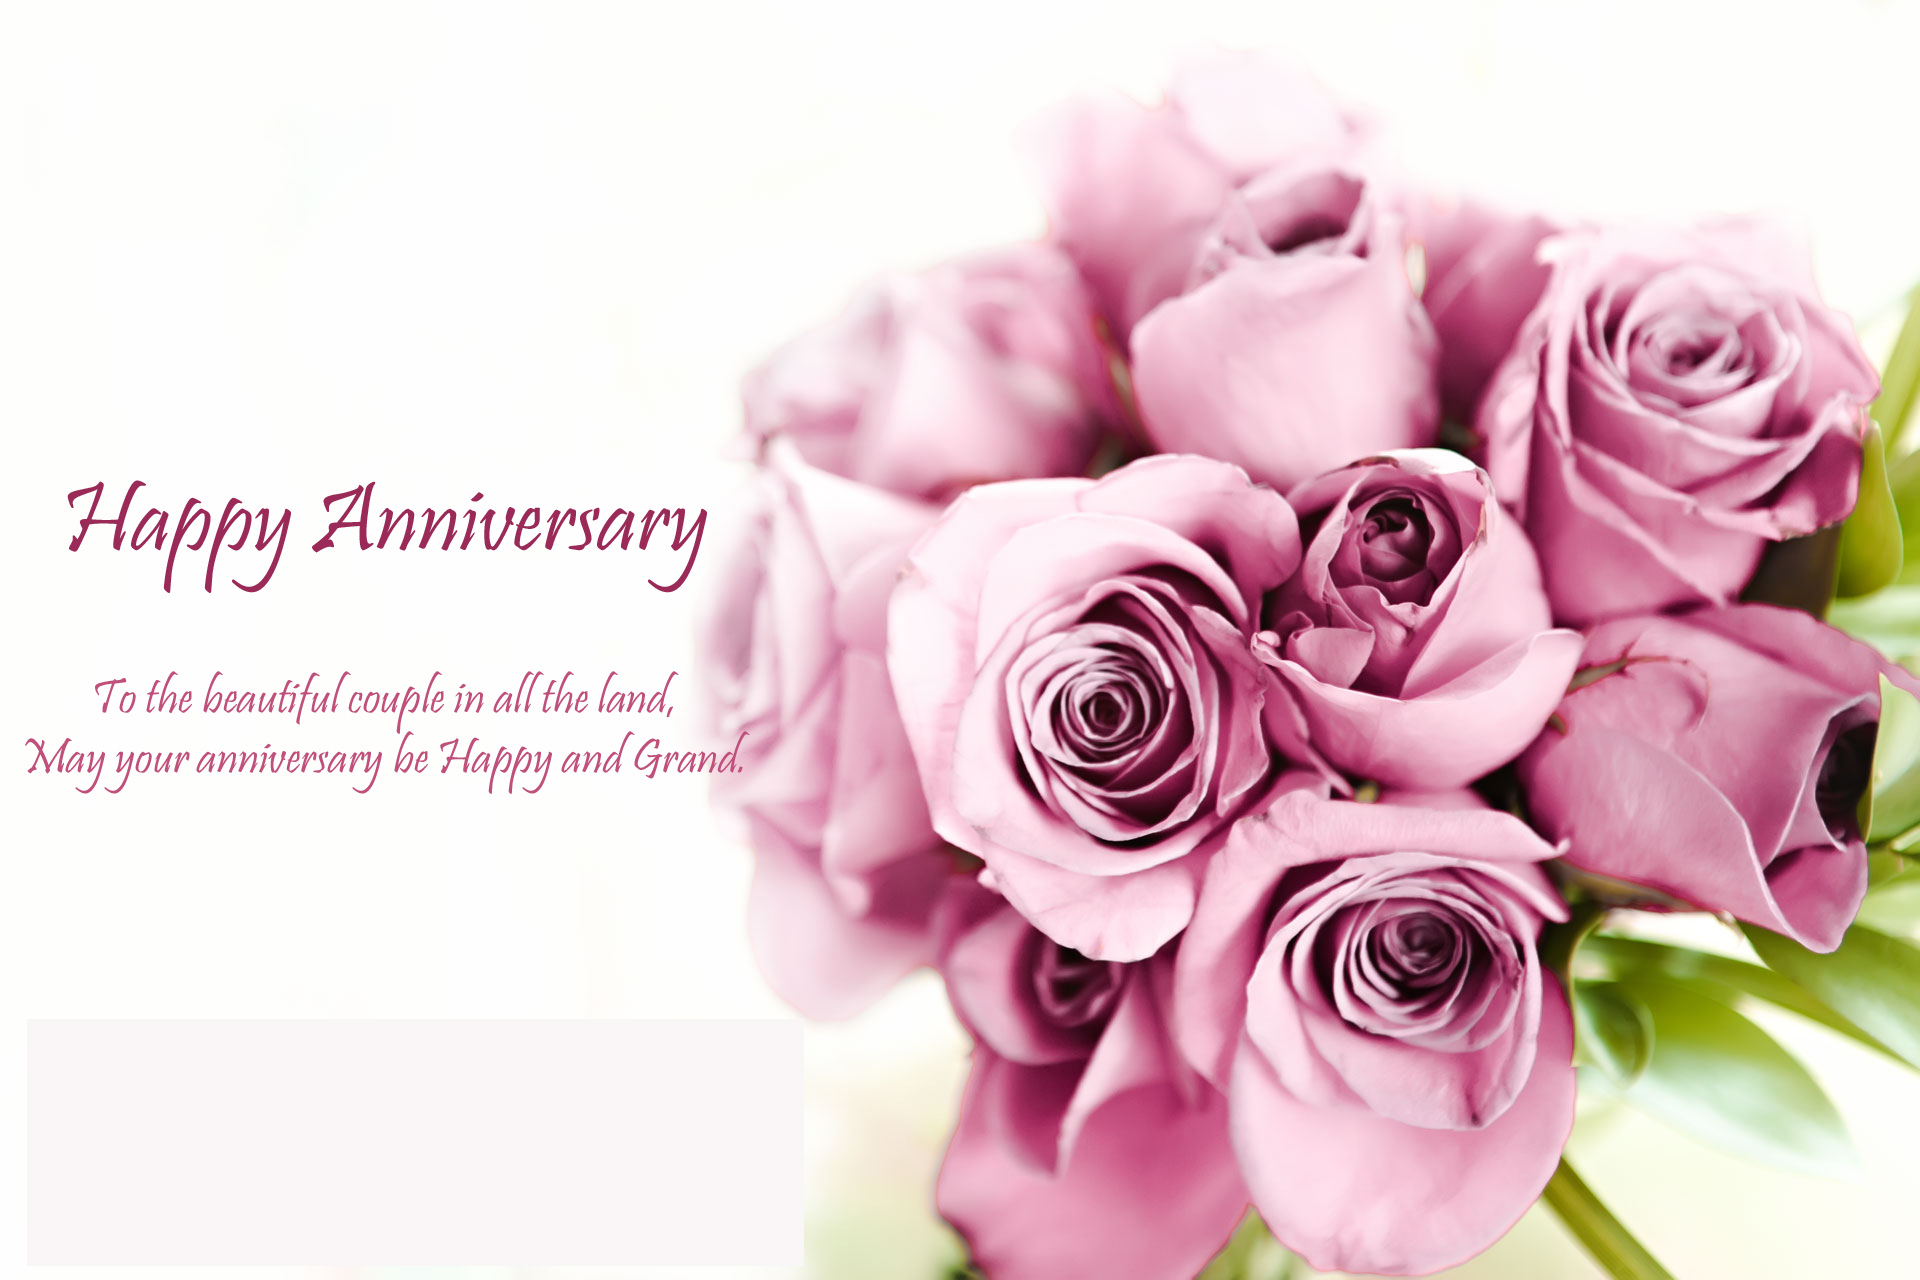 Roses Happy Anniversary Wishes Image With Resolutions Pixel